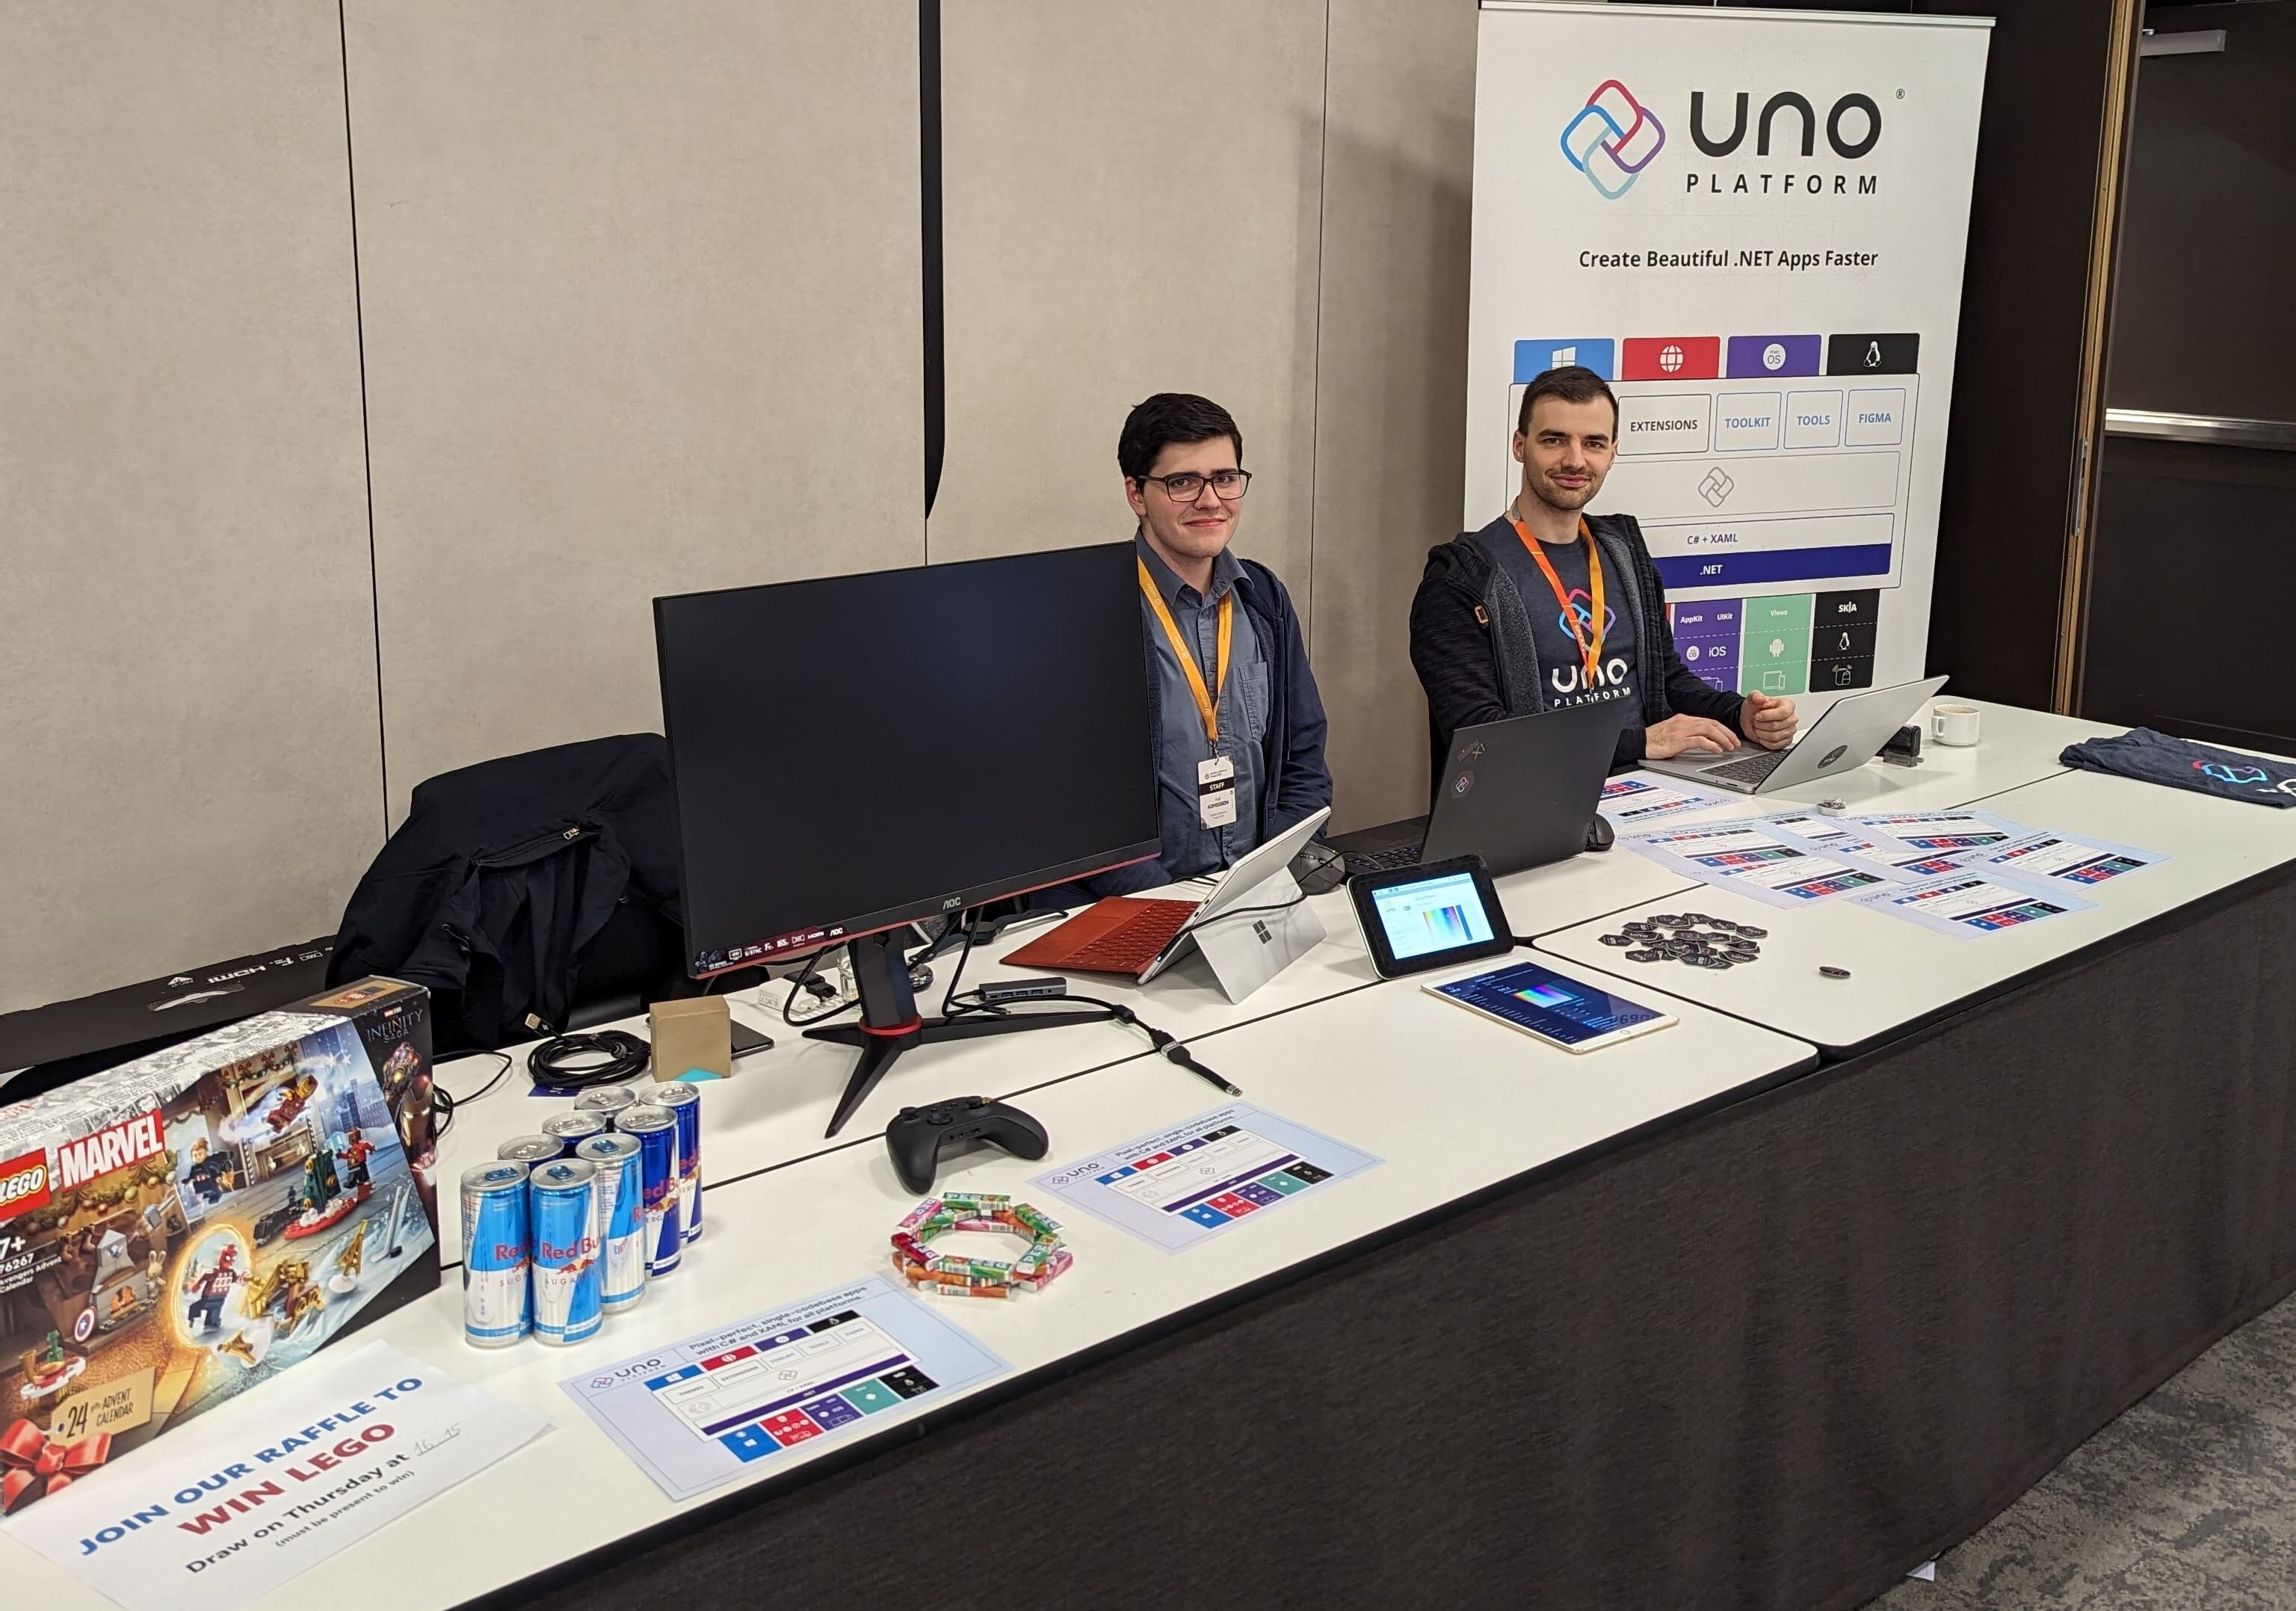 Dominik and Martin at the Uno booth